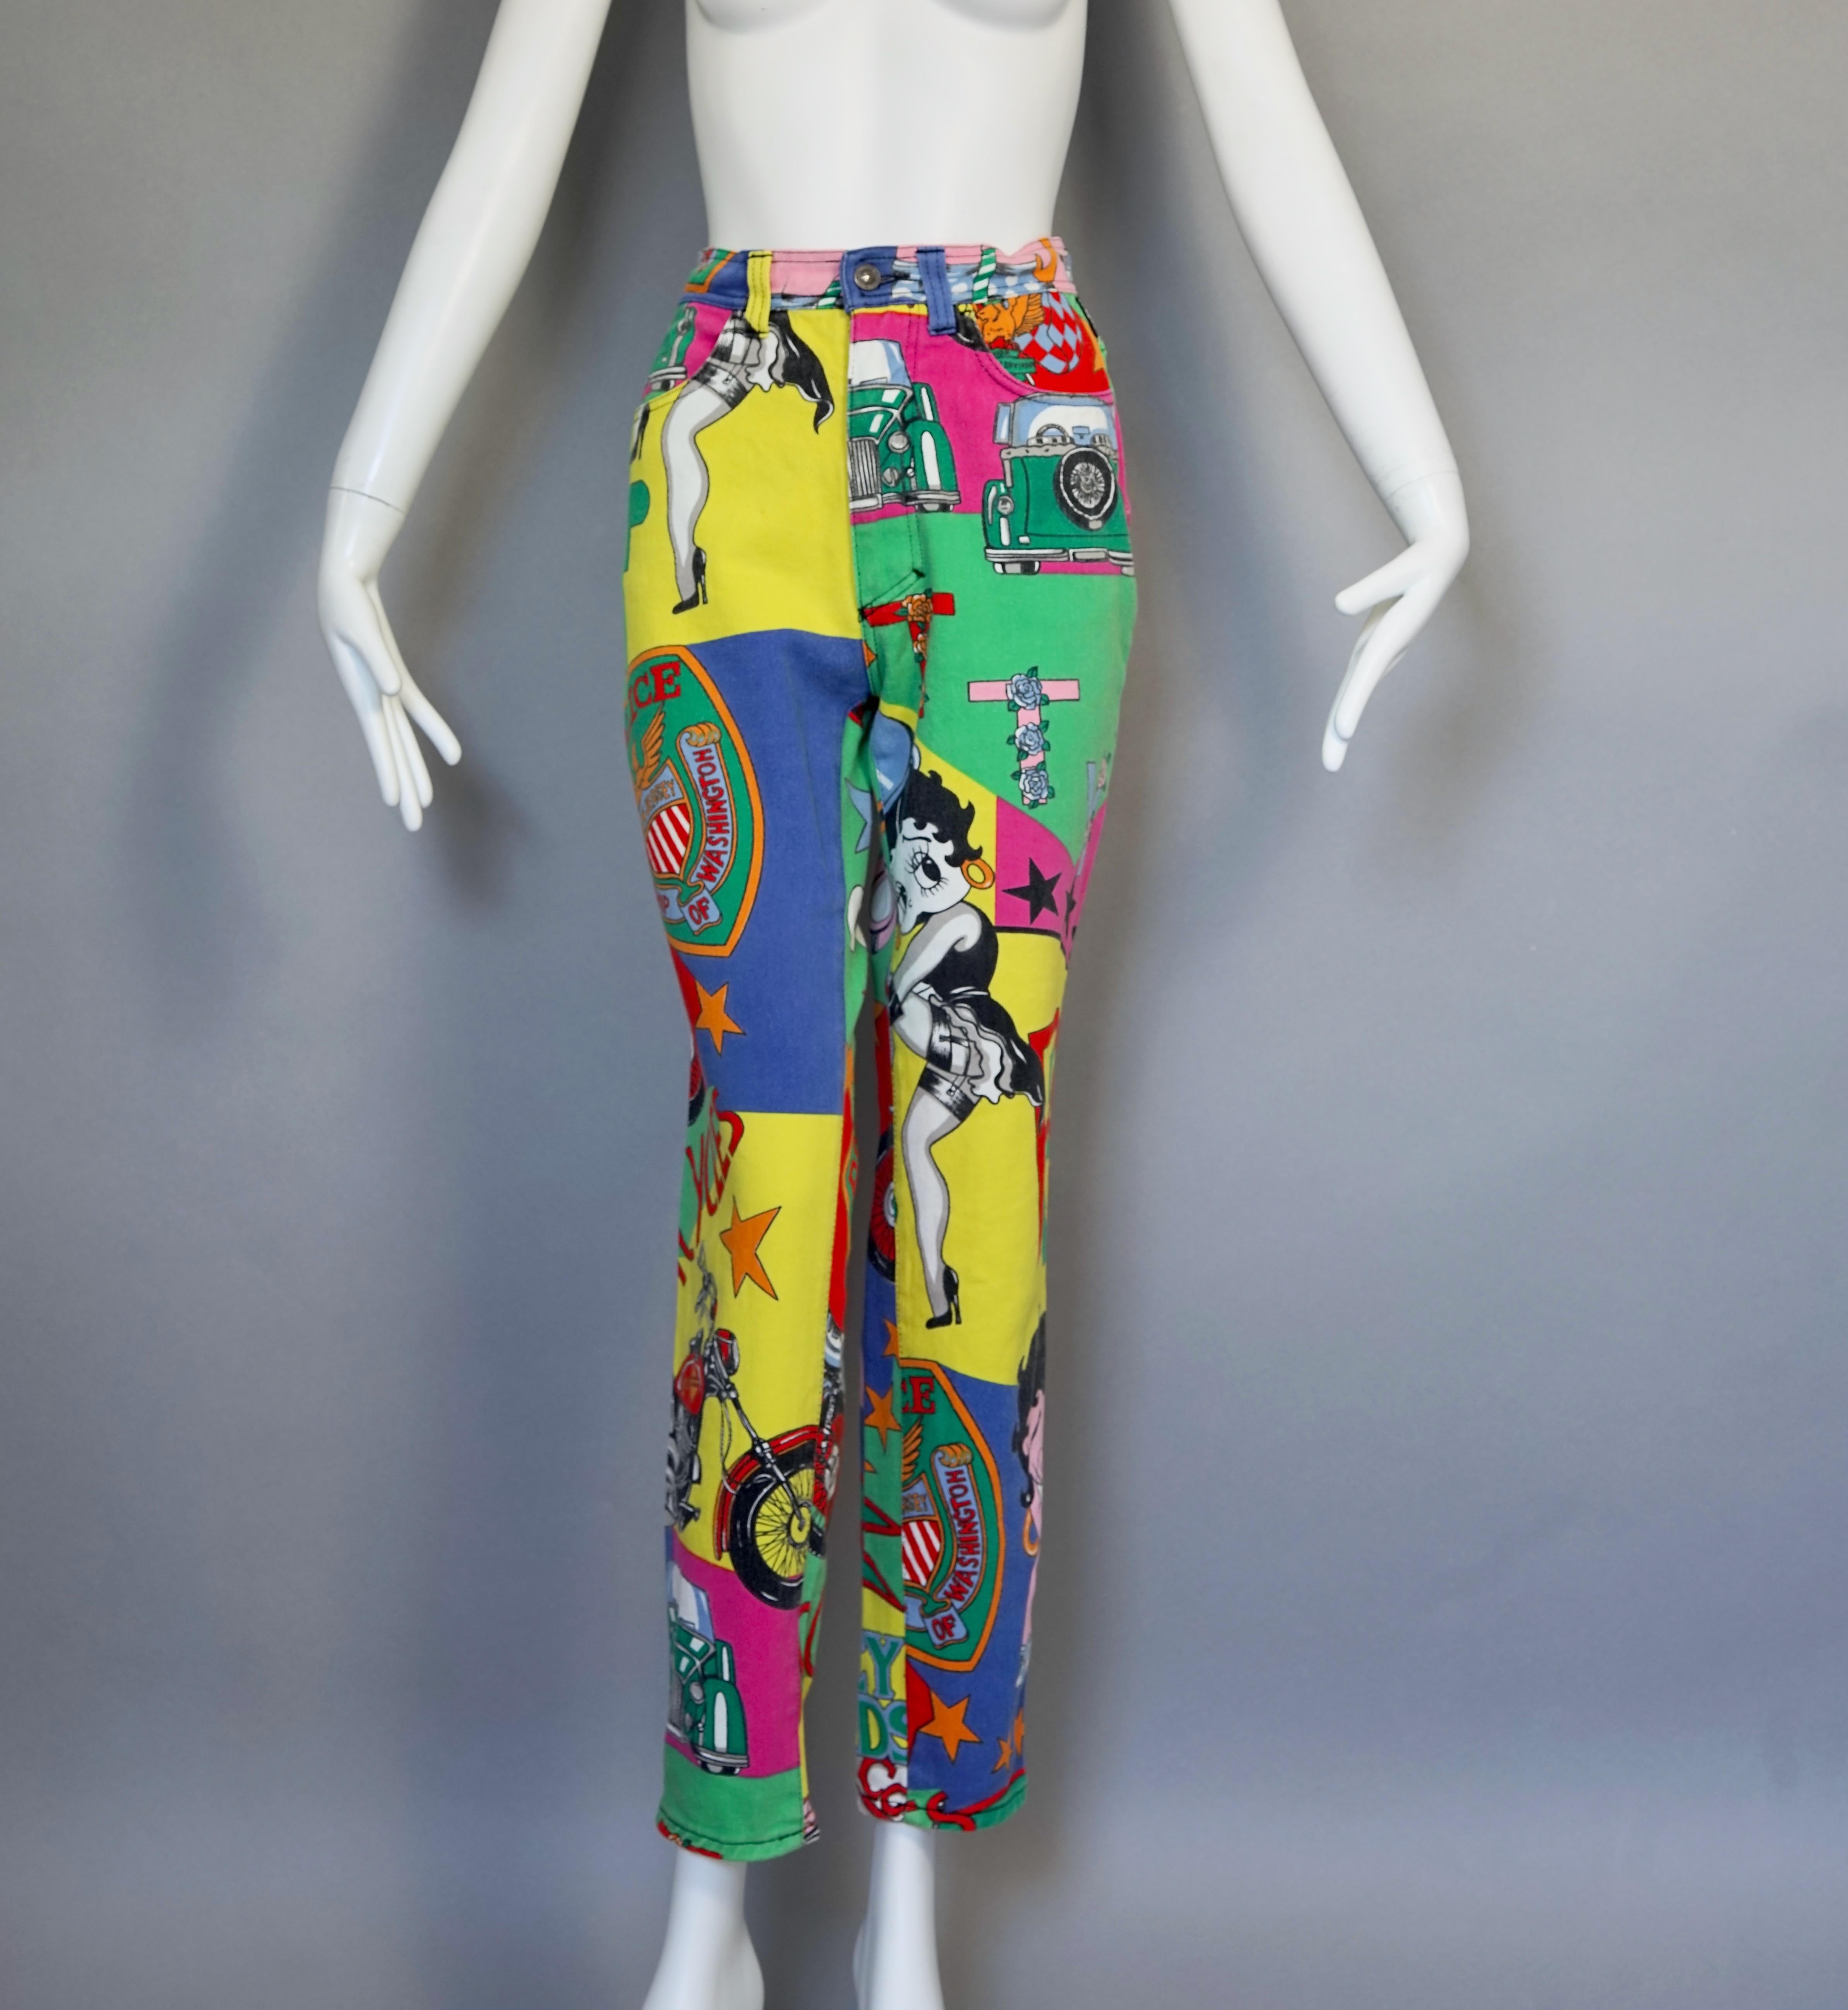 Vintage VERSACE Betty Boop Cartoon Print Pants Jeans Trousers
As seen on Jessie Jay, Kourtney Kardashian(dress version) and Miley Cyrus (jumpsuit version).

Measurements taken laid flat, double waist and hips:
Waist: 14.17 inches (36 cm)
Hips: 19.29